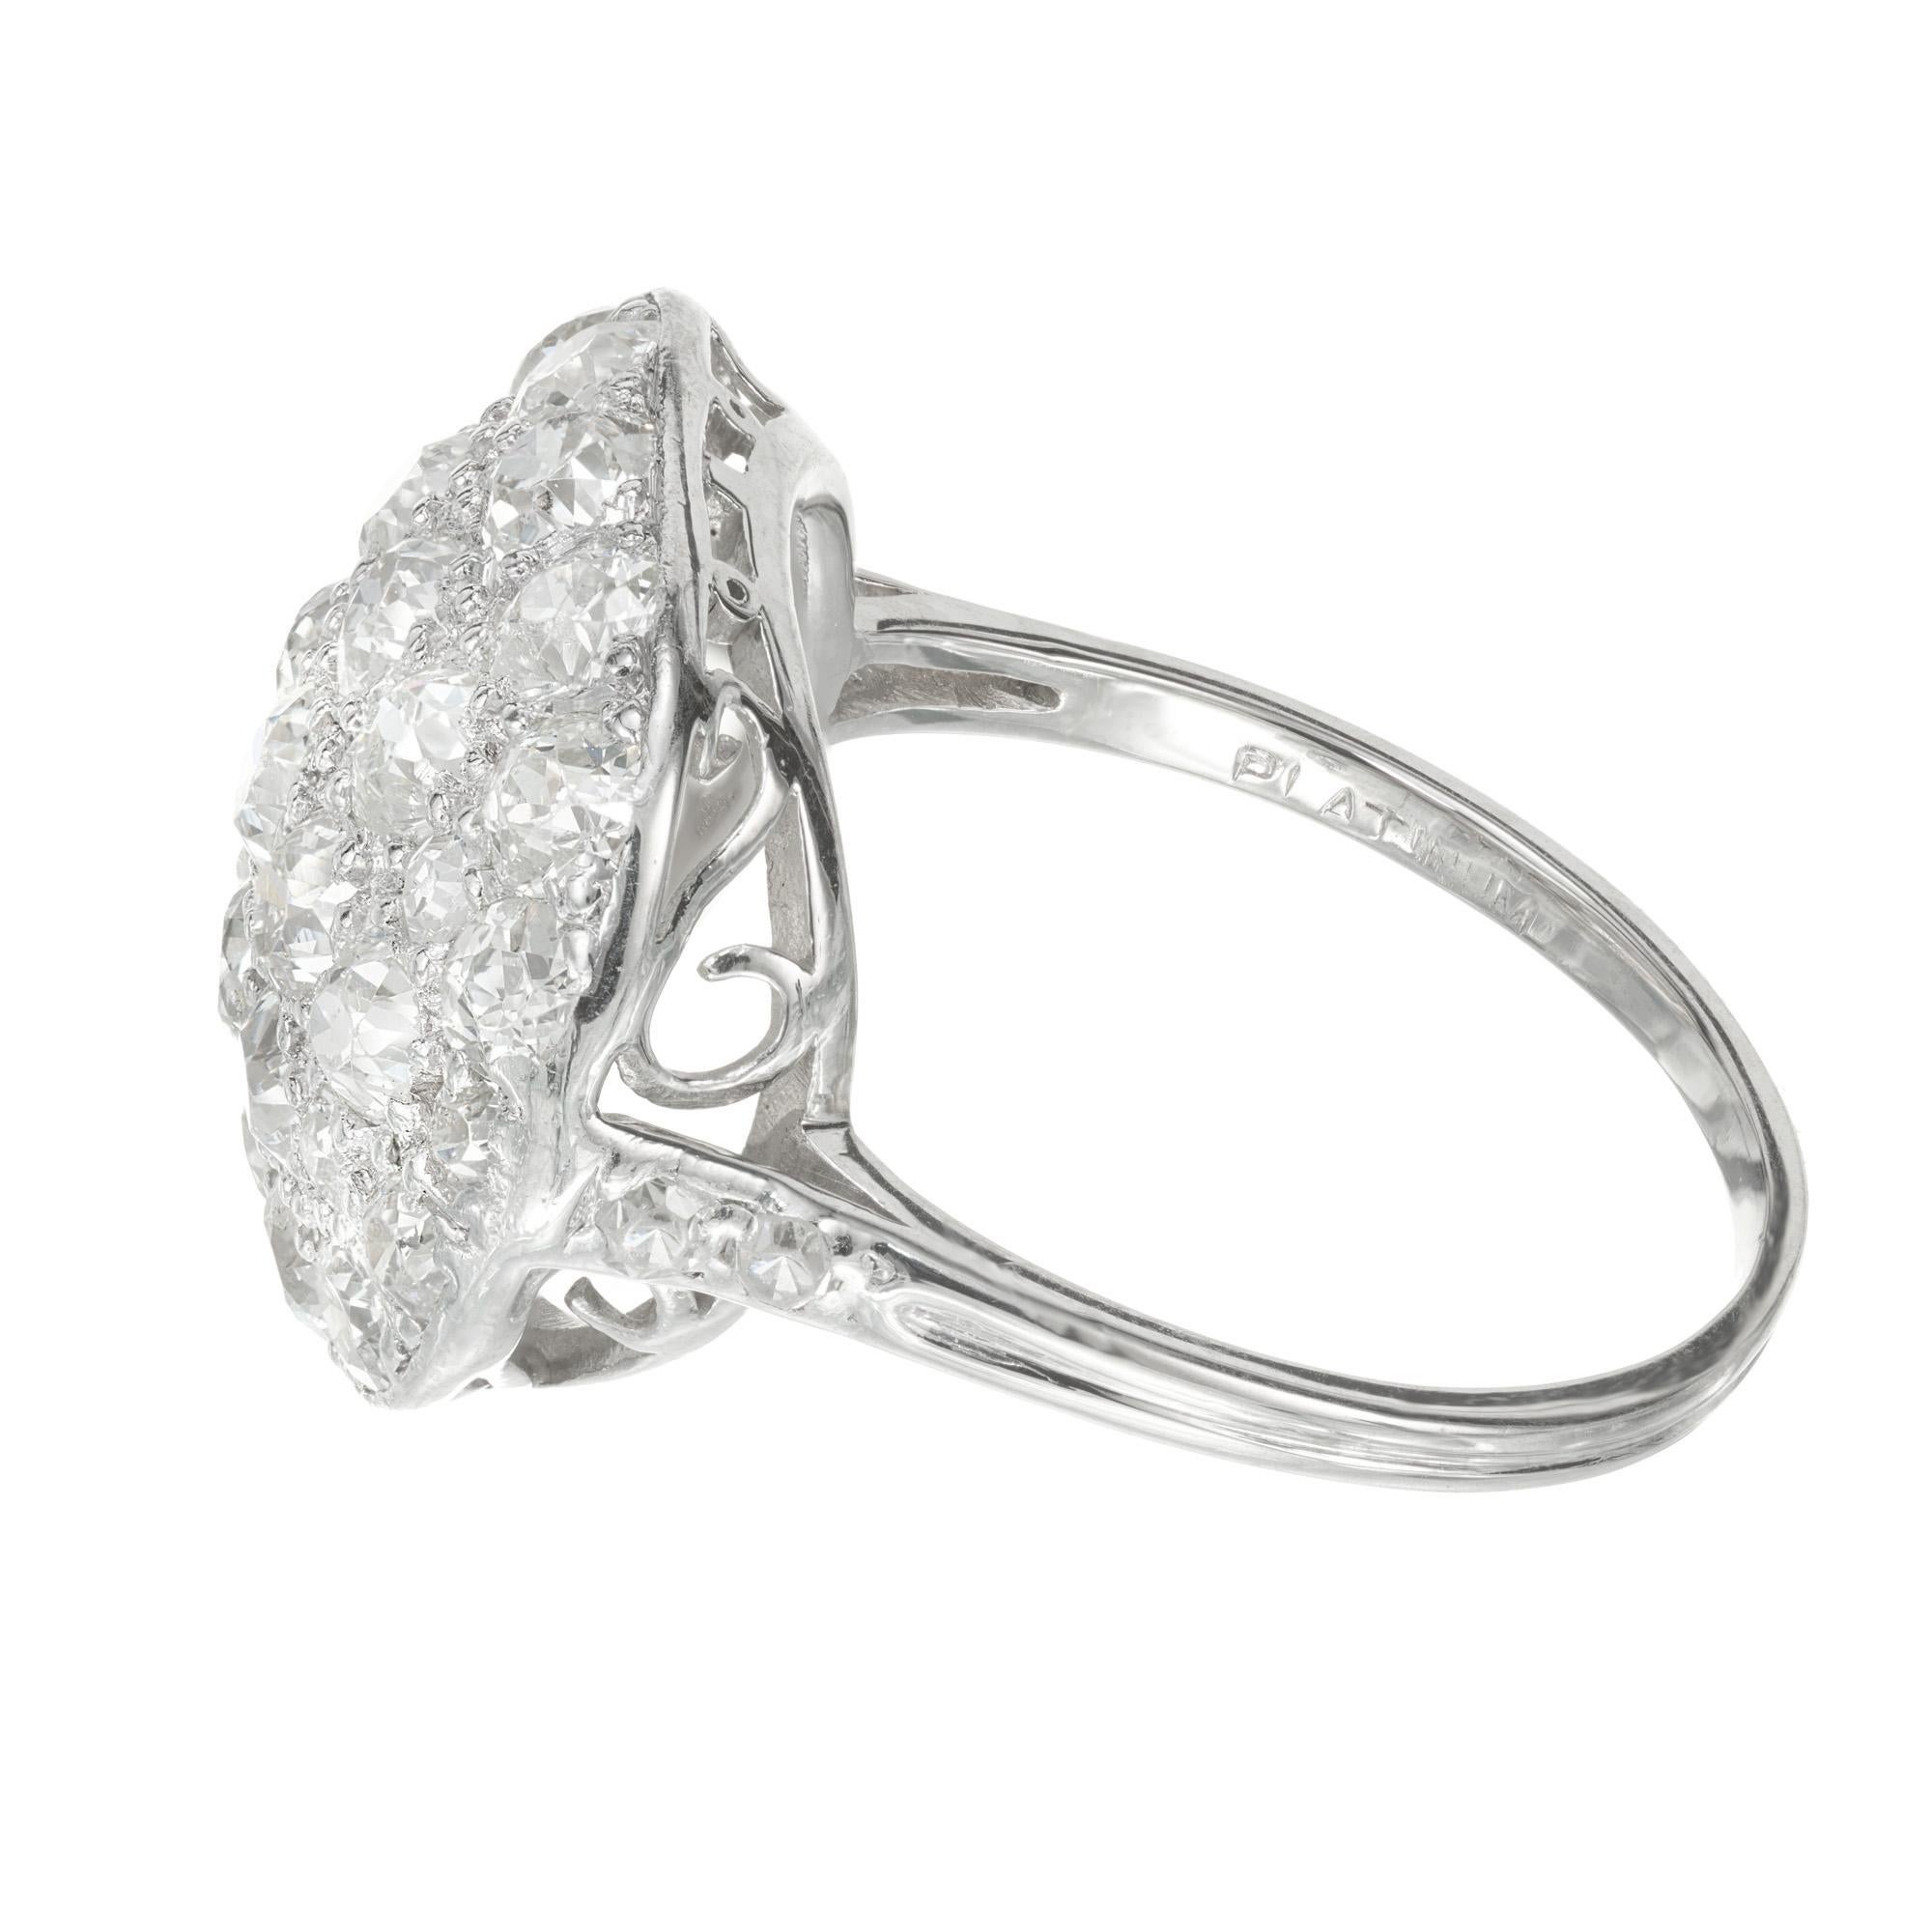 1.54 Carat Diamond Platinum Domed Cluster Ring In Good Condition For Sale In Stamford, CT